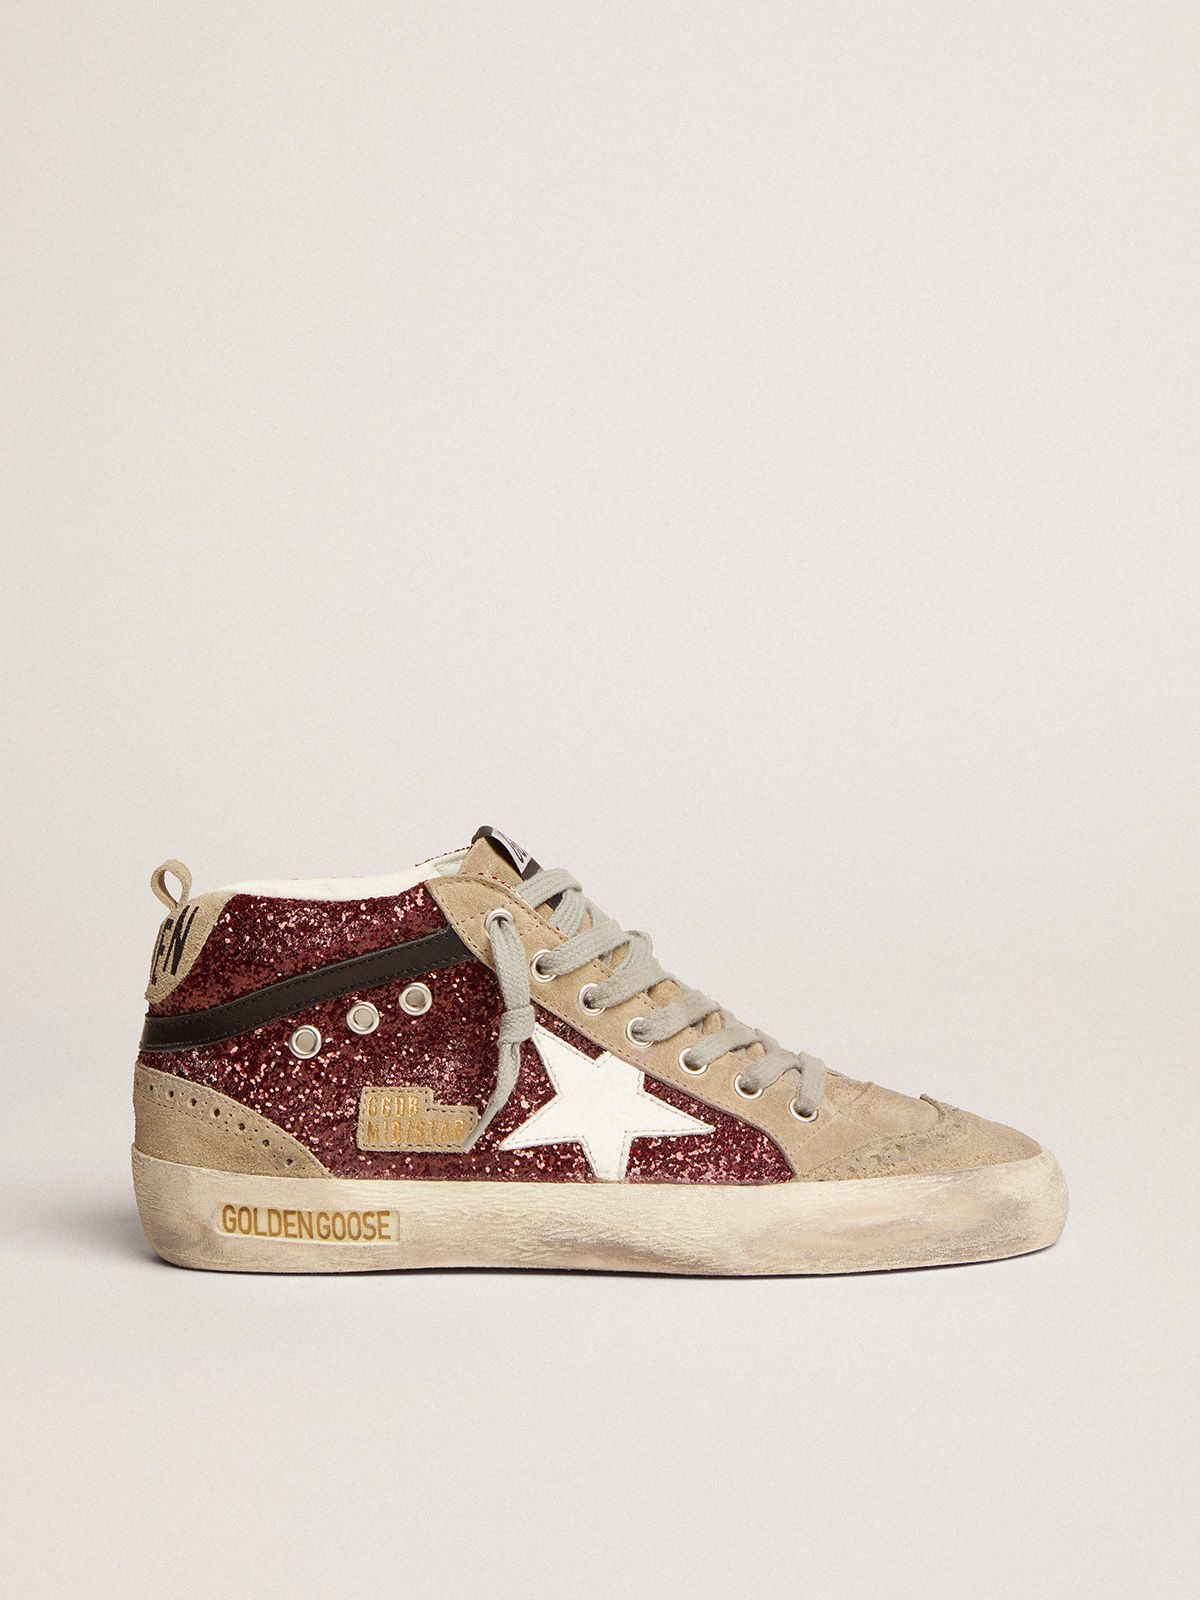 Mid Star sneakers in burgundy glitter with dove-gray suede inserts and white leather star | 